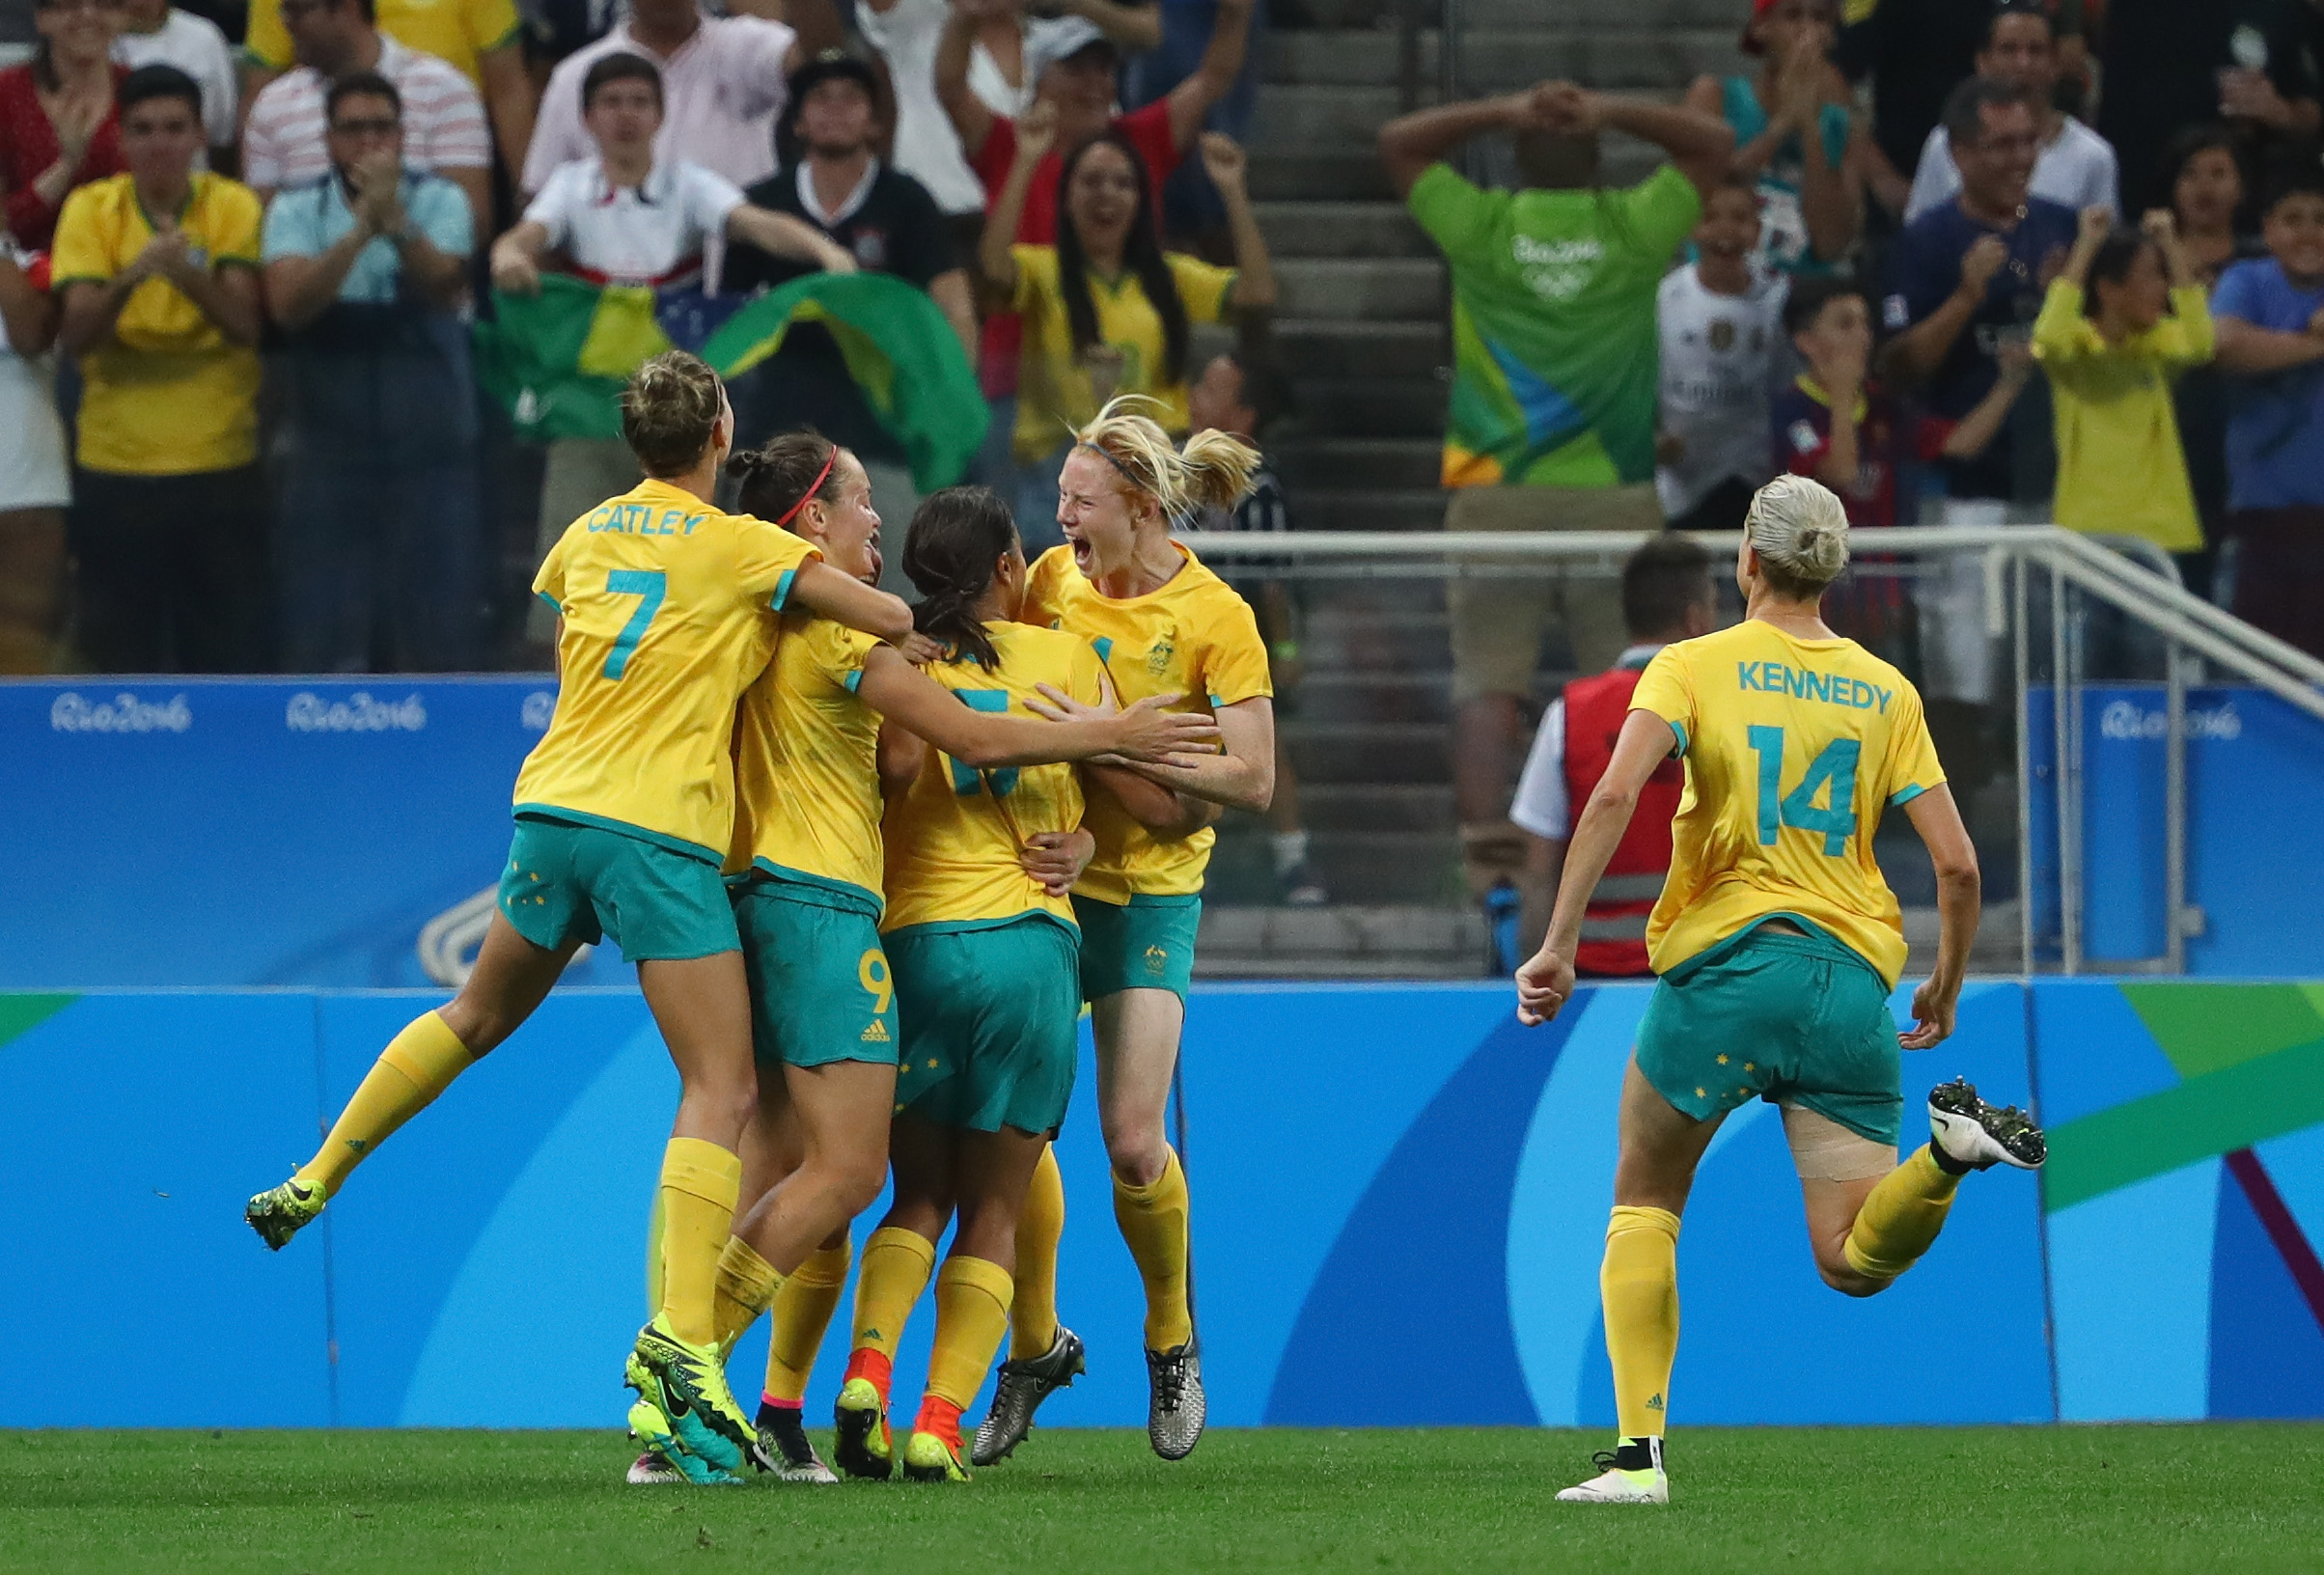 Caitlin Foord of Australia celebrates after scoring a goal during the Women's First Round Group F match between Germany and Australia on Day 1 of the Rio 2016 Olympic Games at Arena Corinthians on August 6, 2016 in Sao Paulo, Brazil. (Photo by Robert Cianflone - FIFA/FIFA via Getty Images)